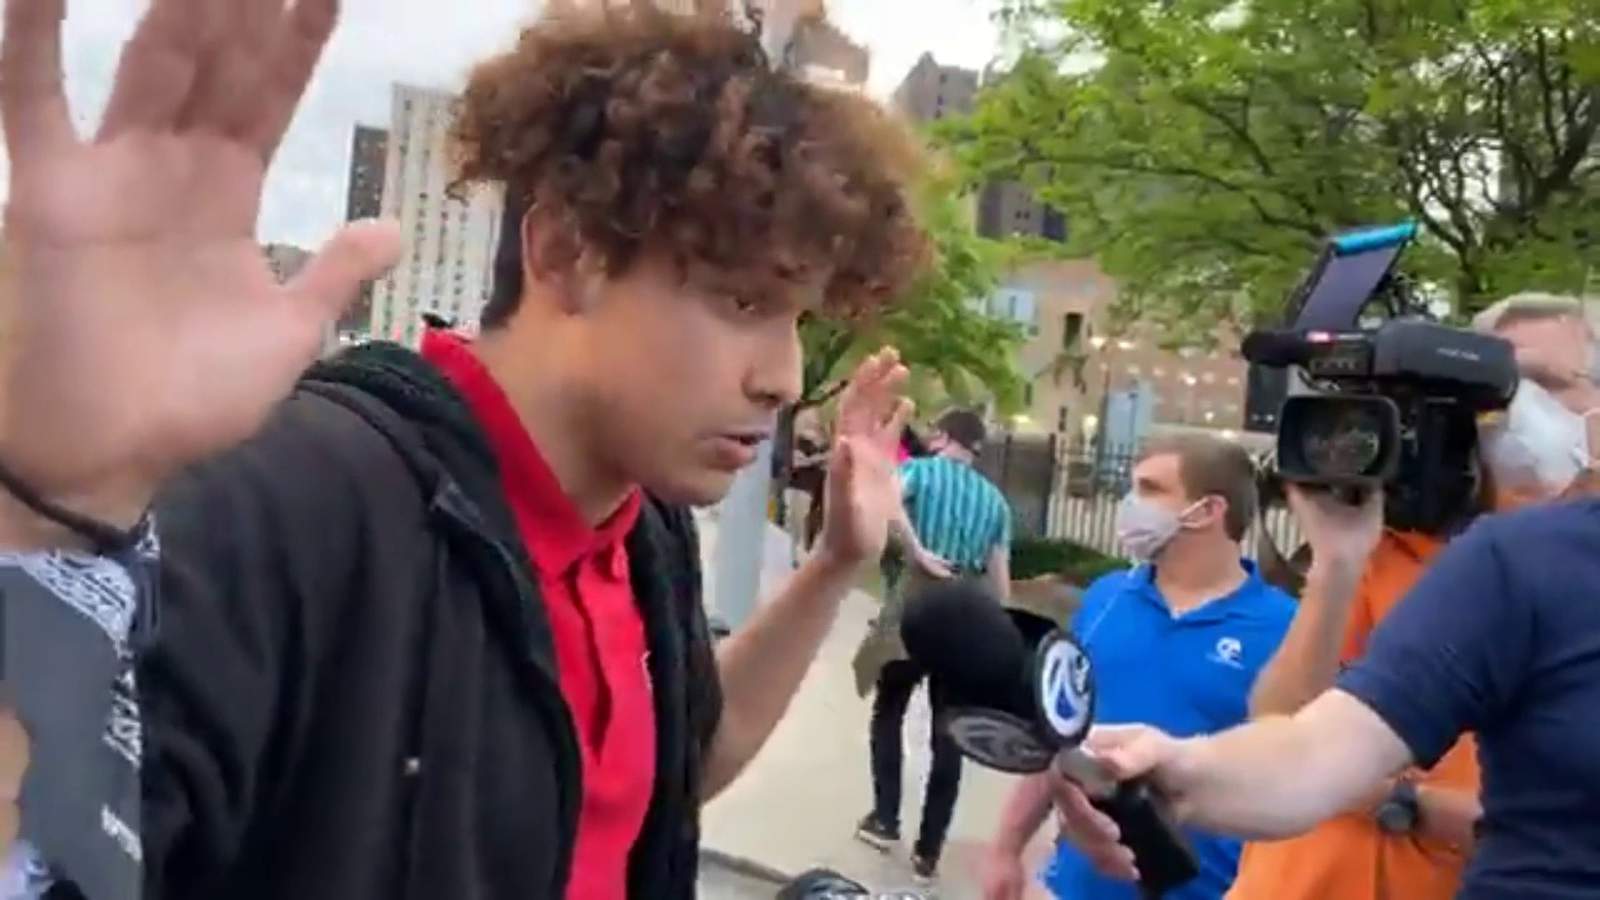 Hear from the 16-year-old who helped lead peaceful protest against police brutality in Detroit